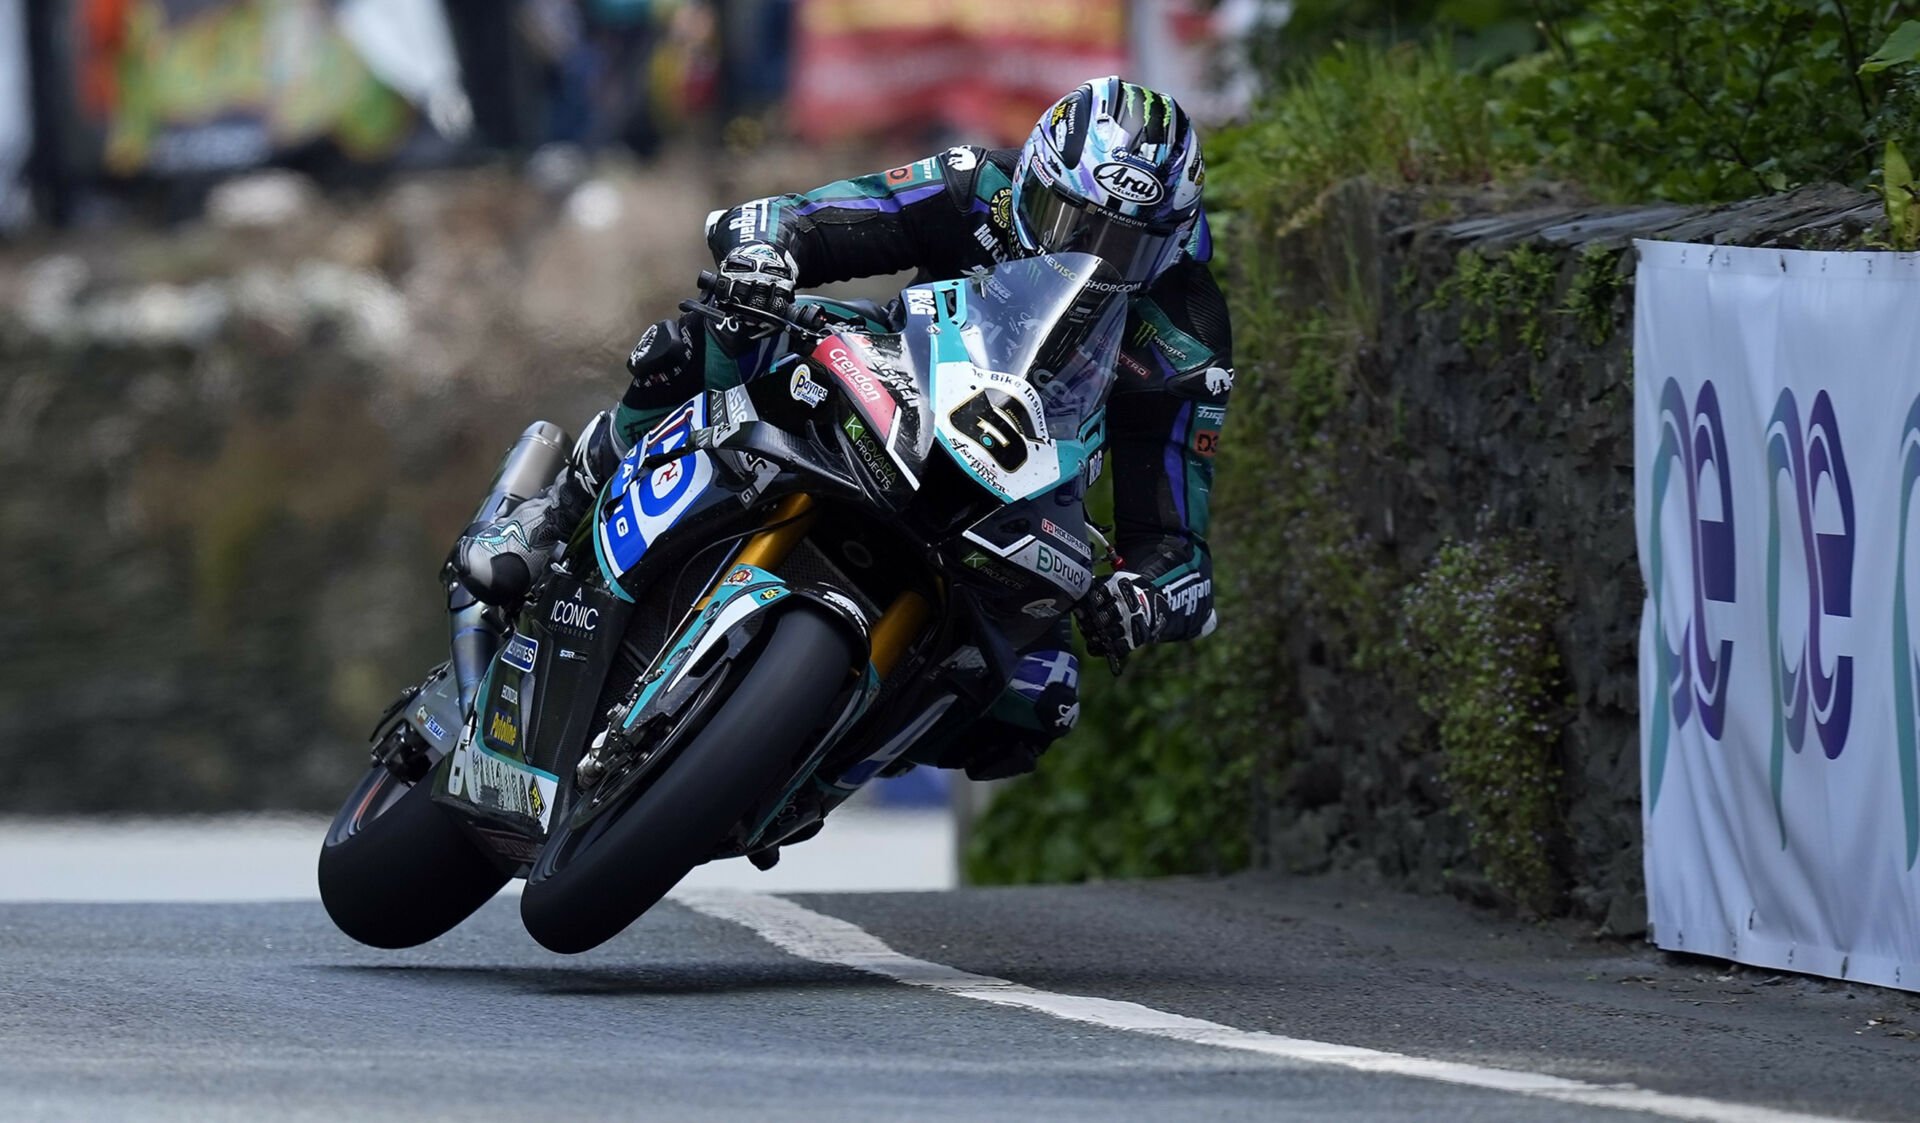 Michael Dunlop (6) at speed at the Isle of Man TT. Photo courtesy SBS Friction.